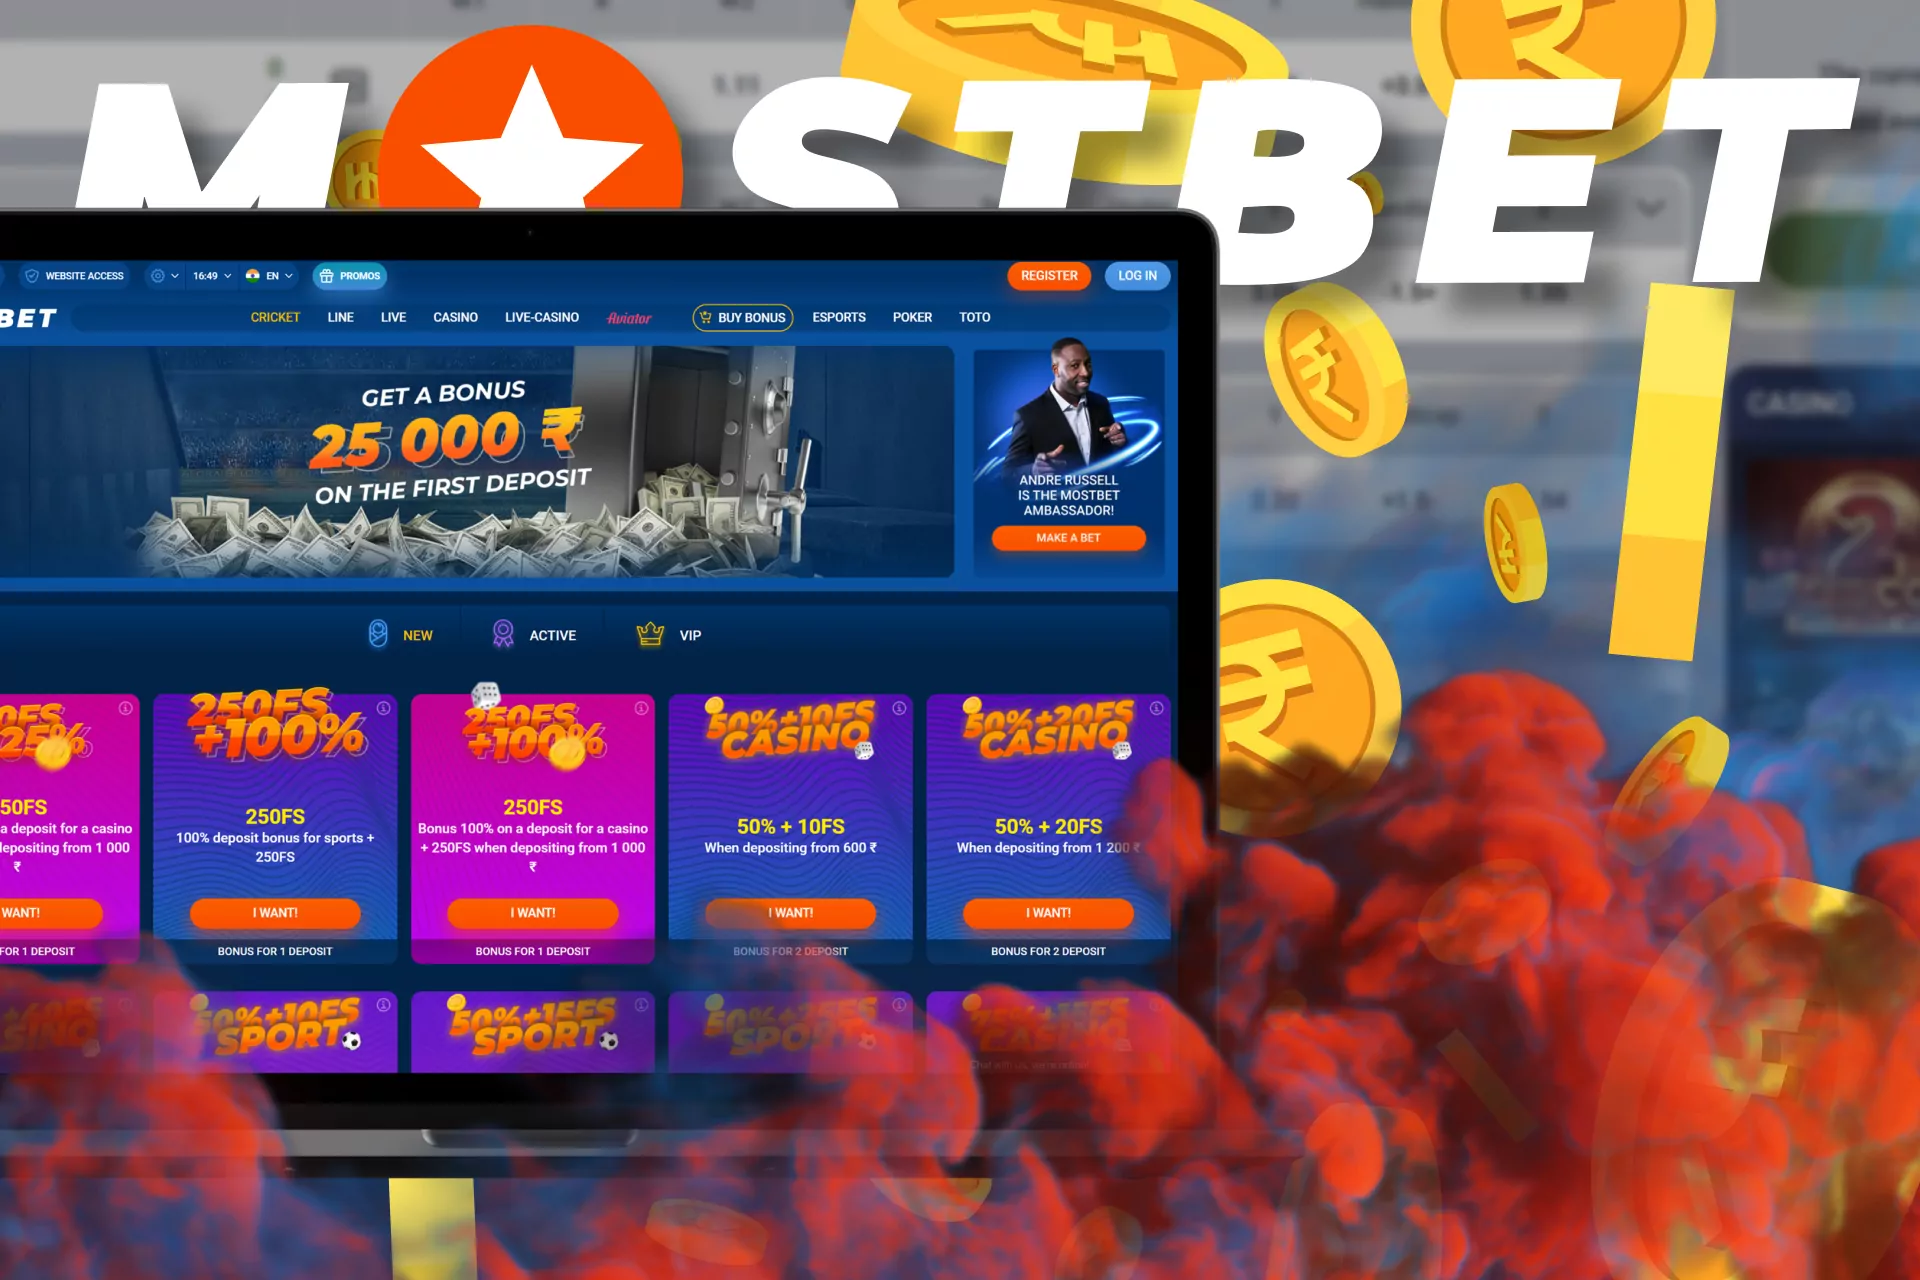 With Mostbet, get a special bonus for cashback on bets.